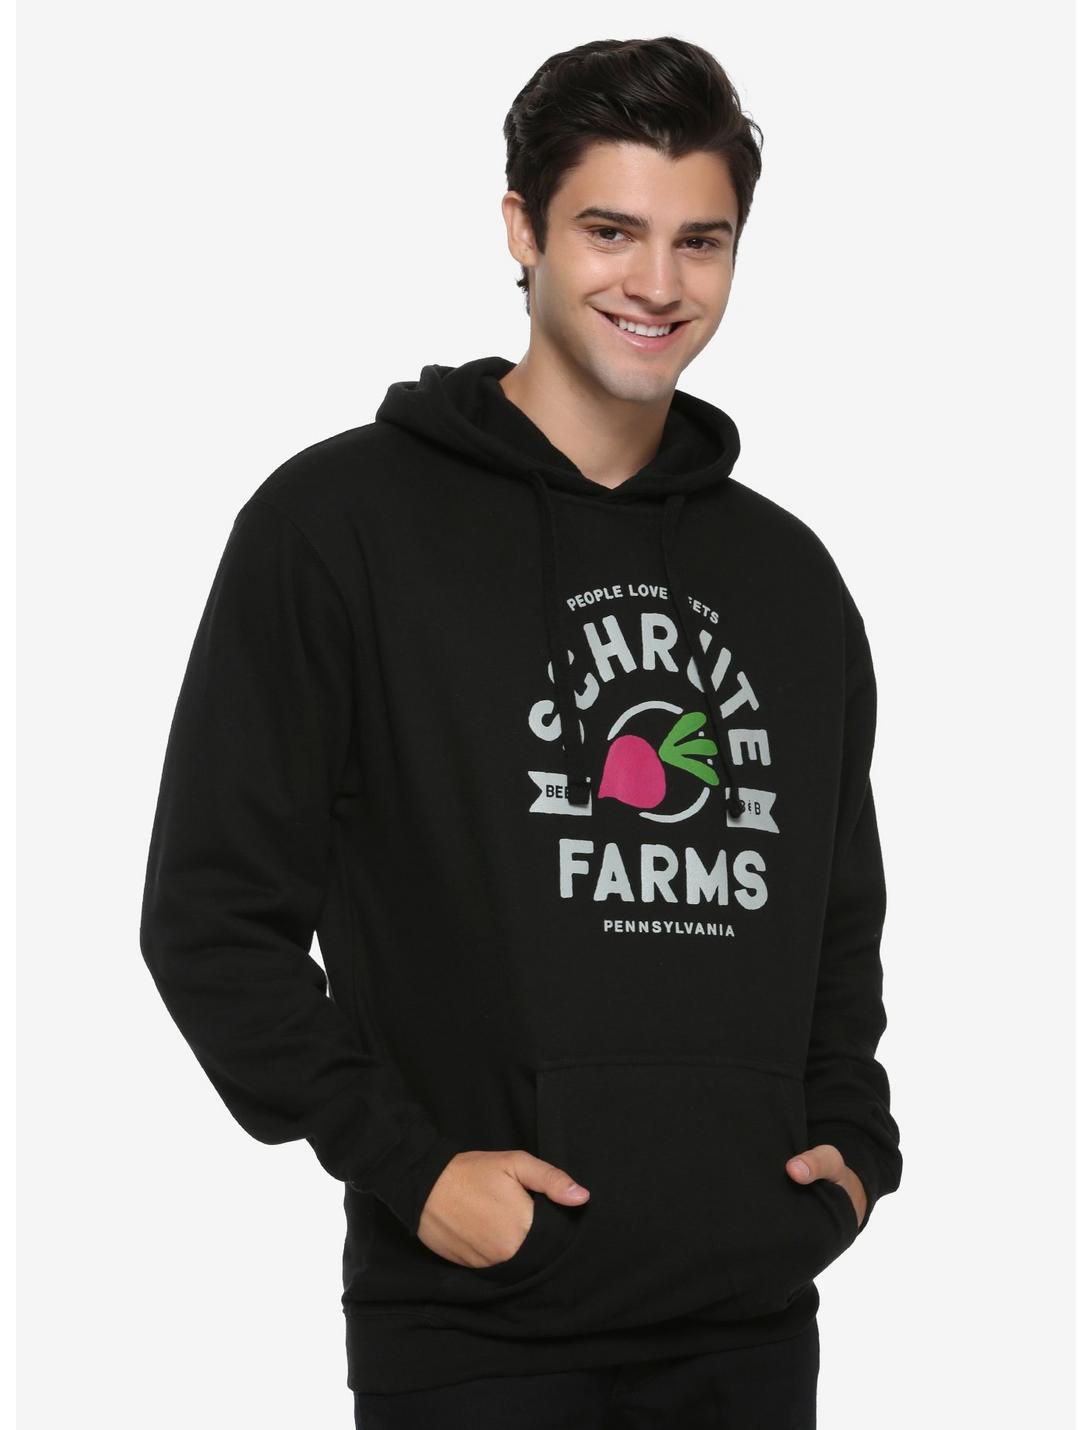 The Office Schrute Farms Black Hoodie, BLACK, hi-res